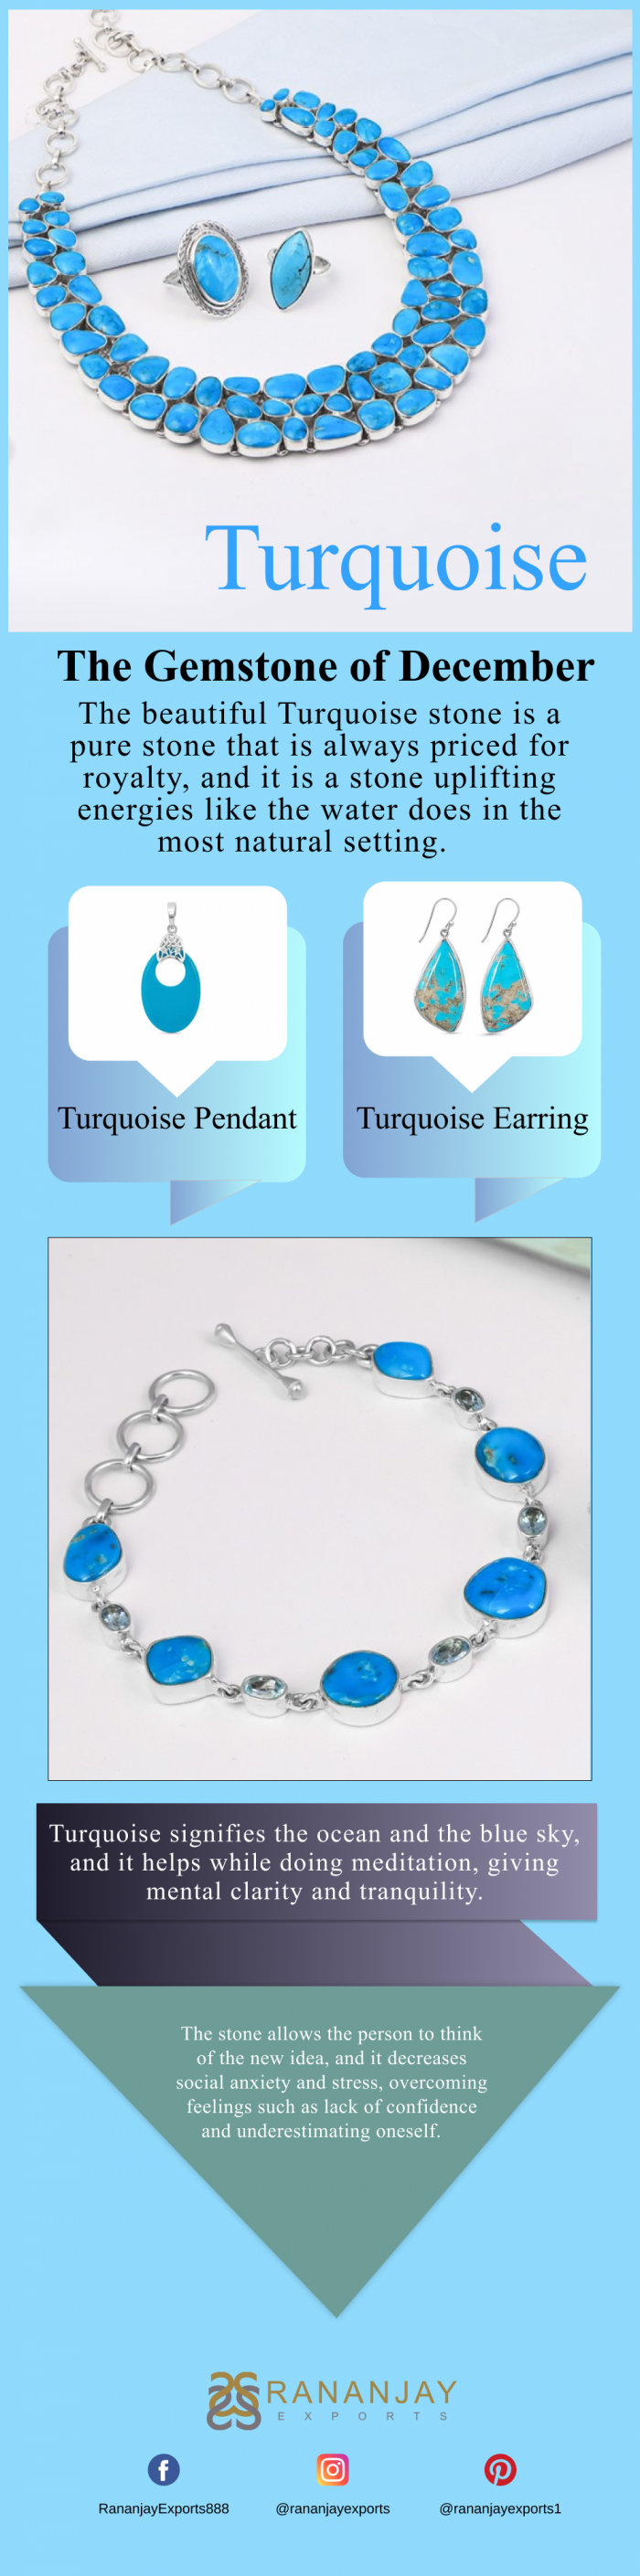 Turquoise – The Gemstone of December